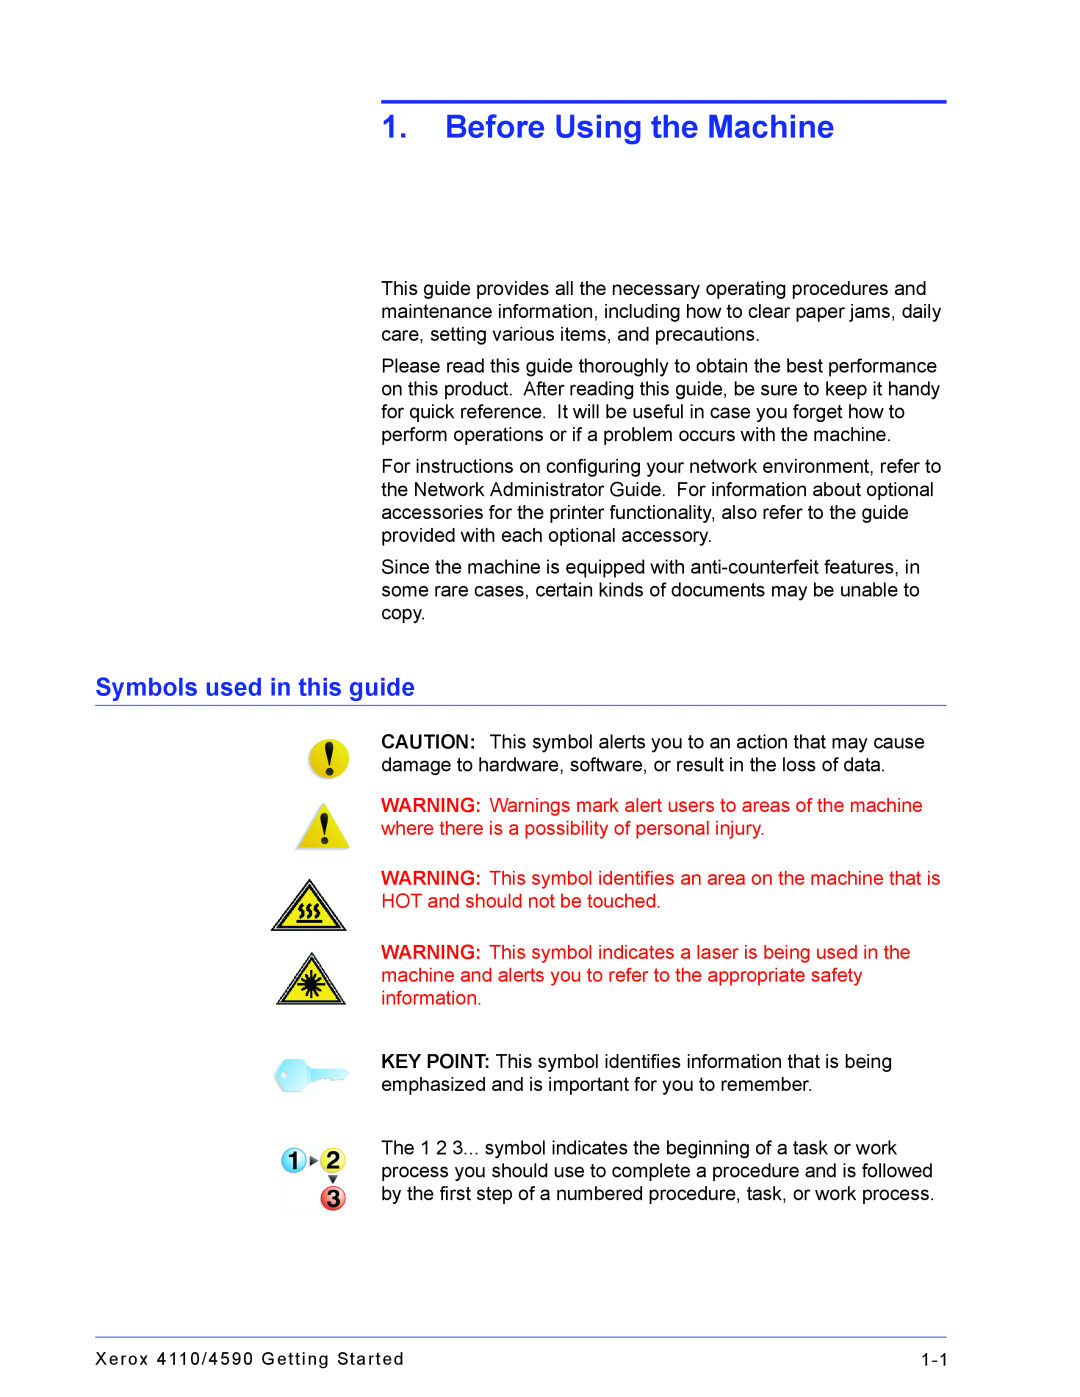 Xerox 4110, 4590 manual Before Using the Machine, Symbols used in this guide, HOT and should not be touched 